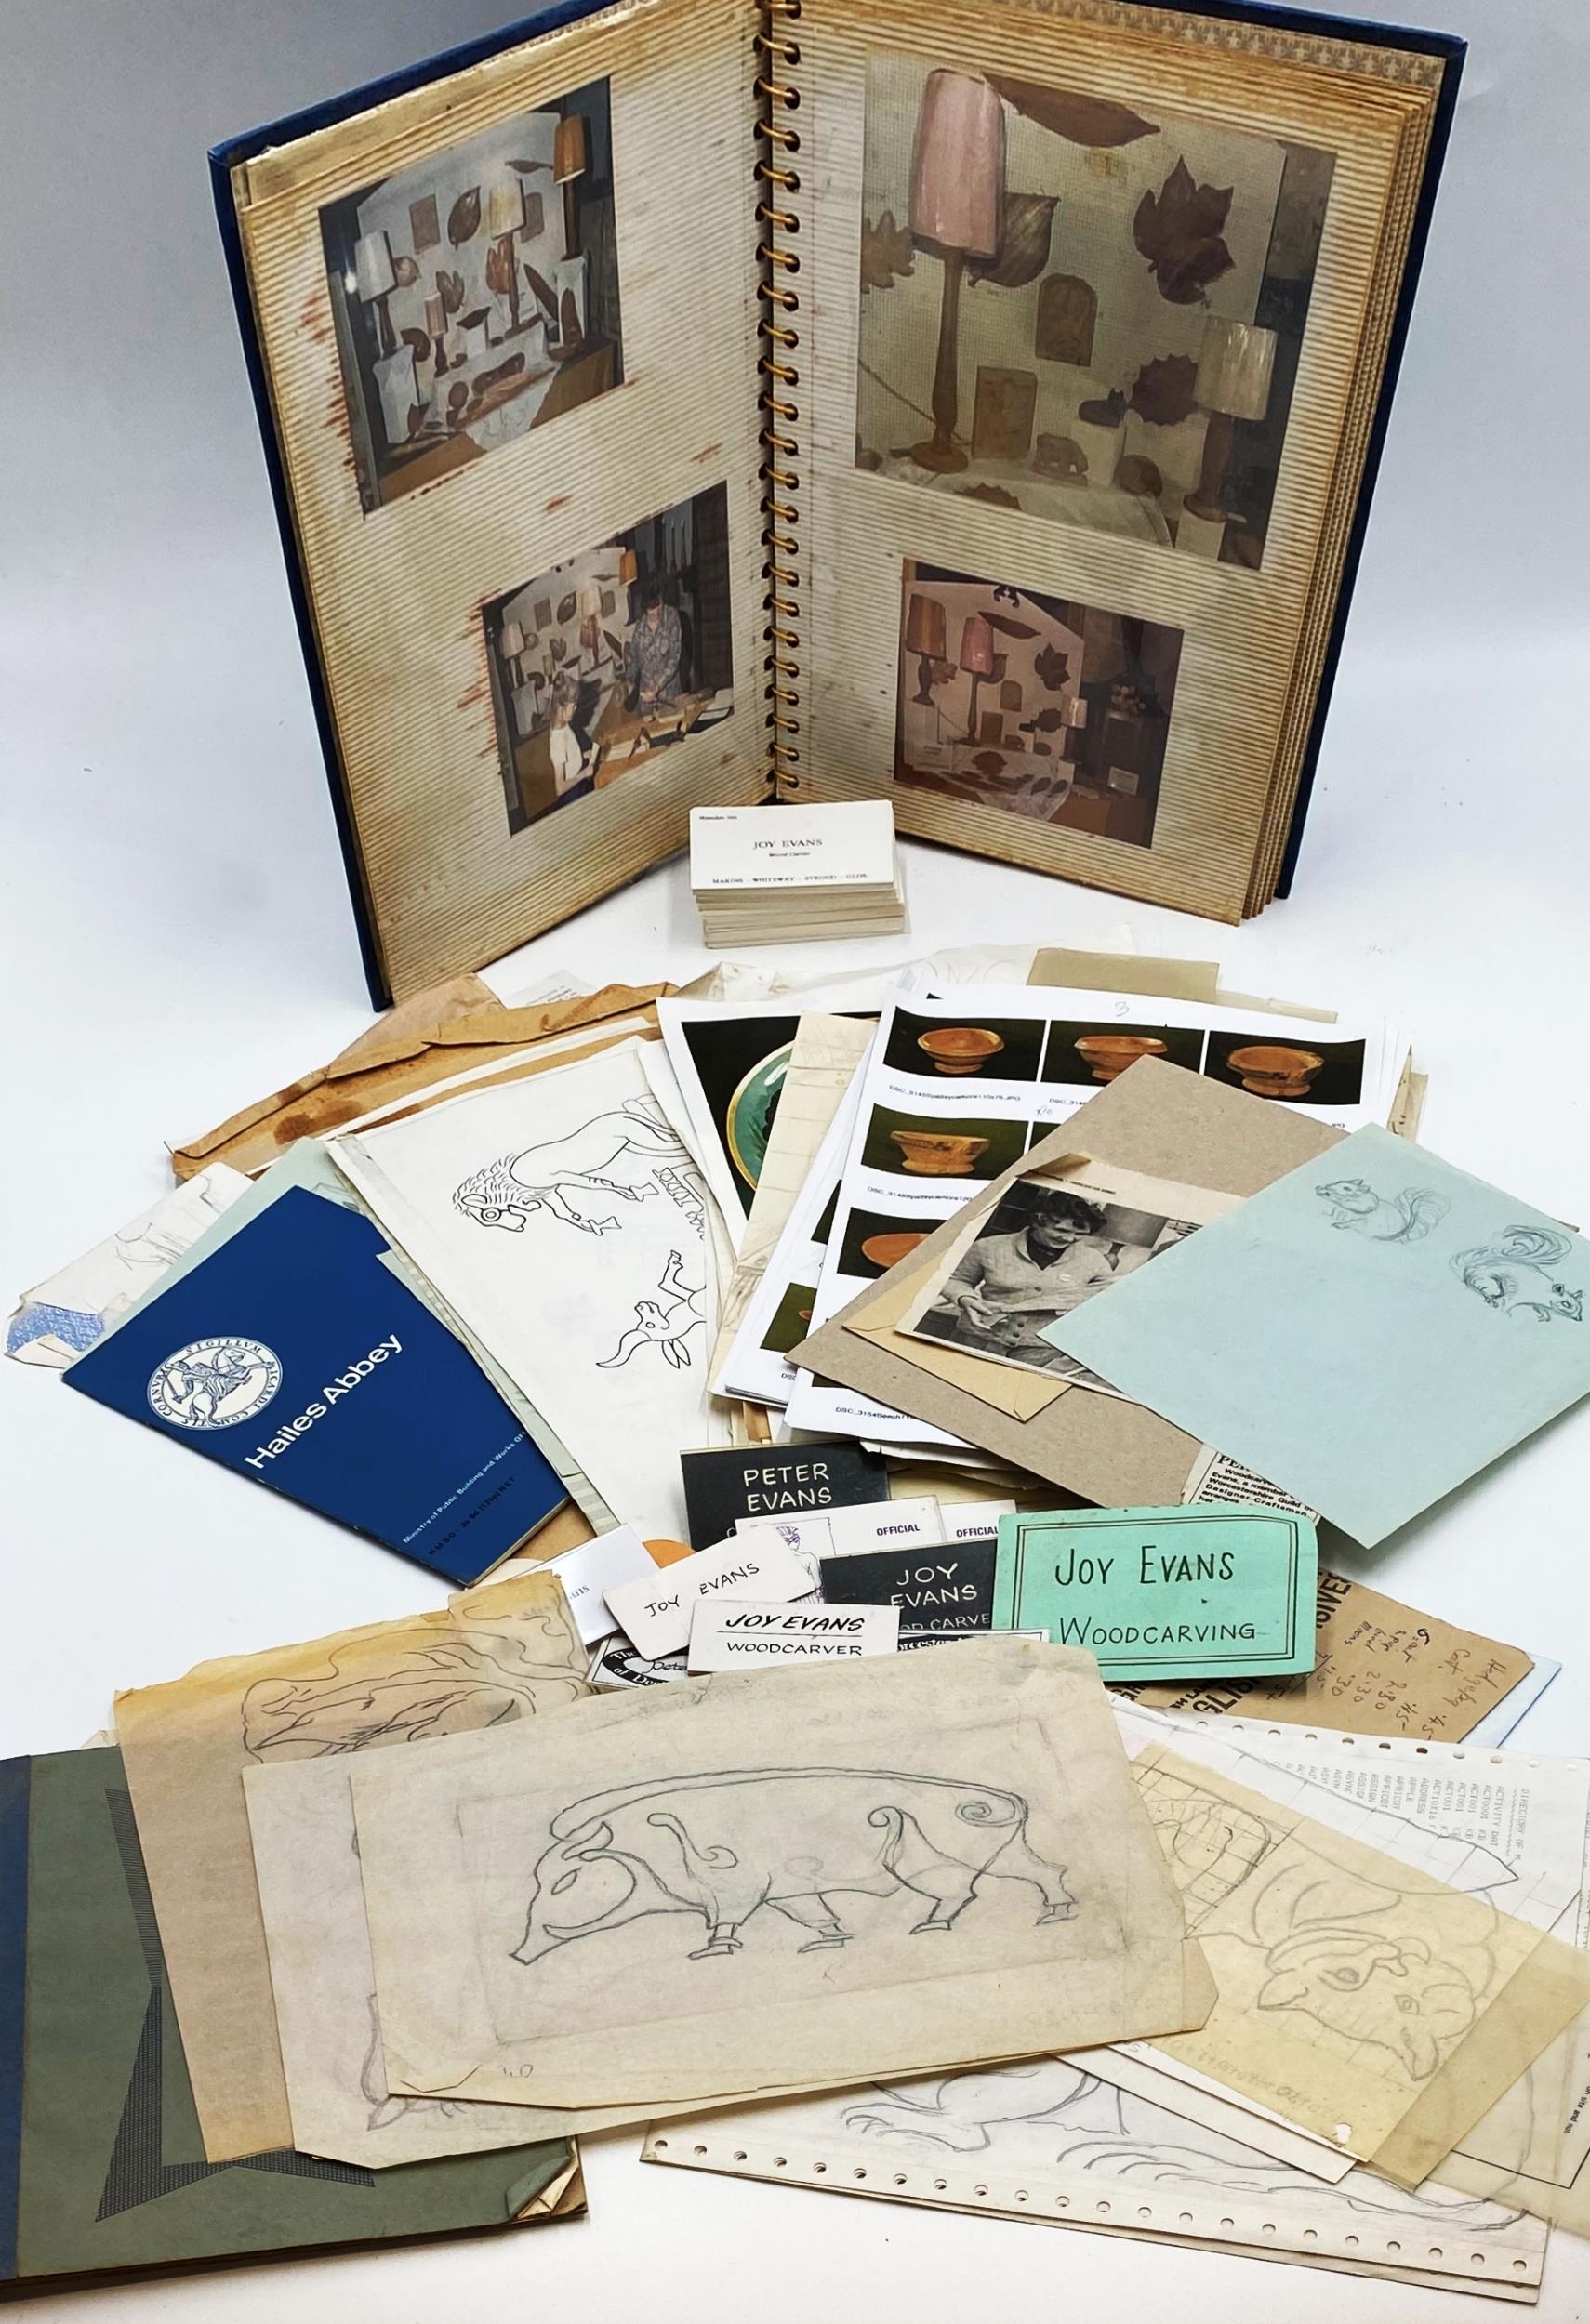 The estate of Peter & Joy Evans of Whiteway, Stroud - Collection of workshop drawings and sketches